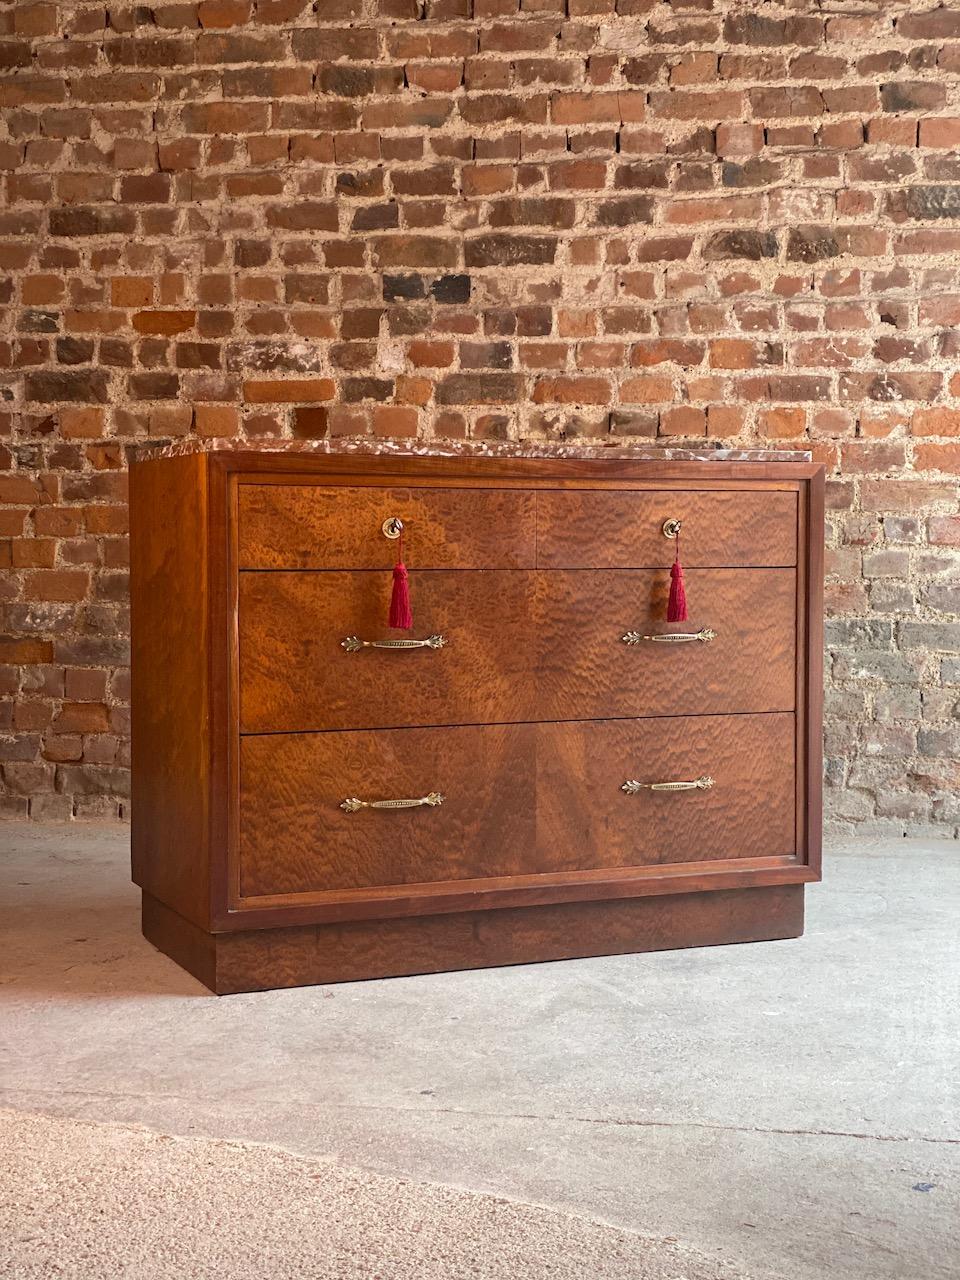 Art Deco Thuya marble-top commode chest of drawers, France, circa 1930

Magnificent early 20th century Art Deco continental Thuya marble-topped commode, France, circa 1930, The rectangular top with reddish brown with white veined Italian marble